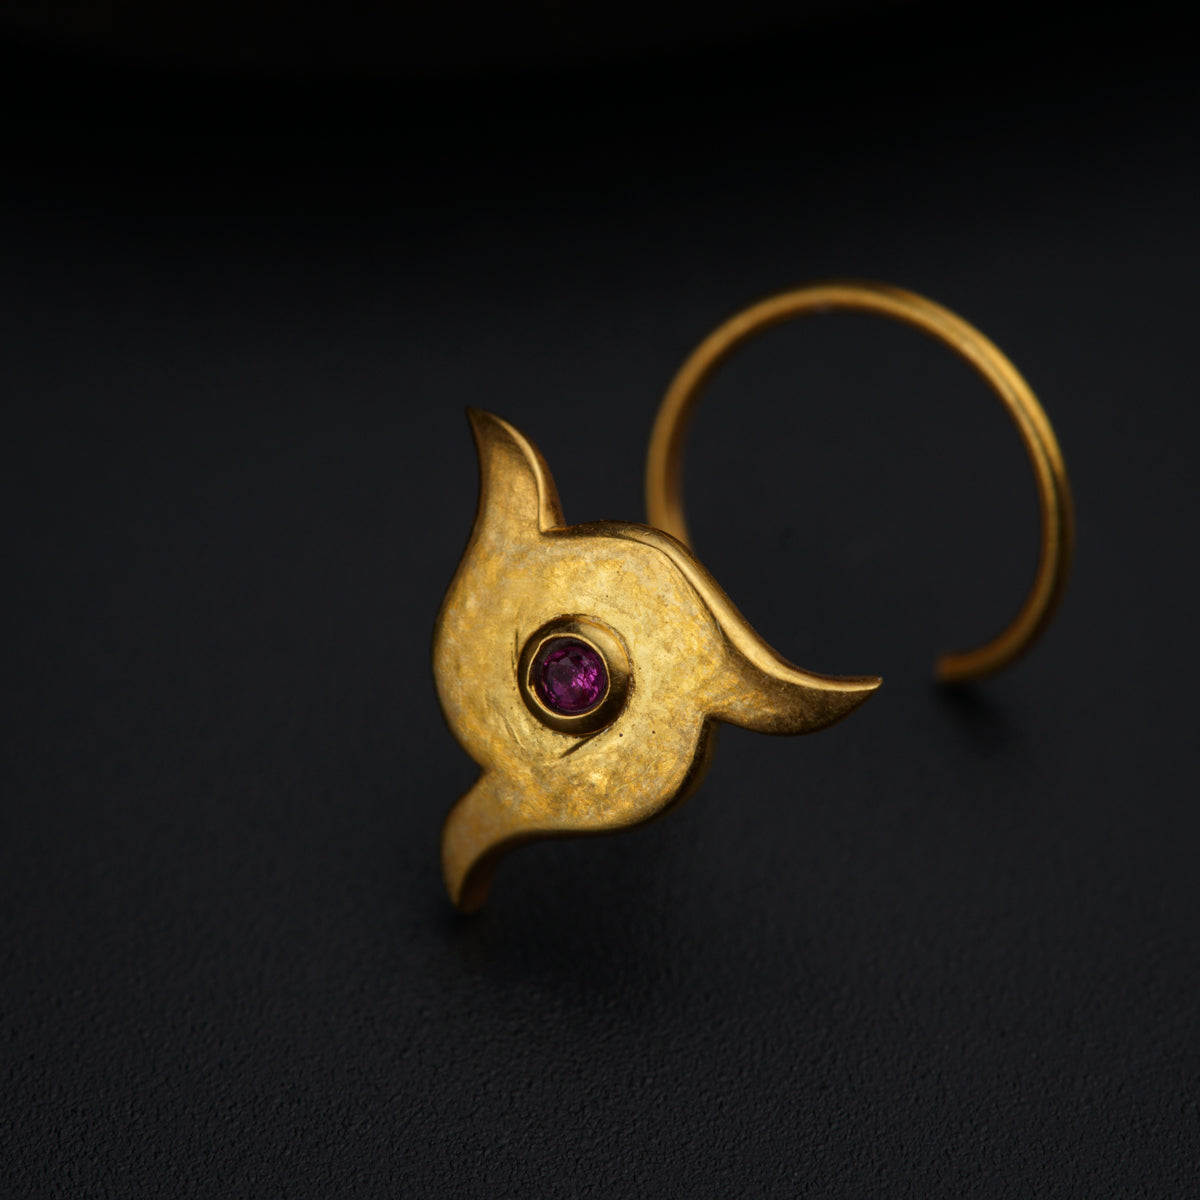 a close up of a gold ring with a purple stone